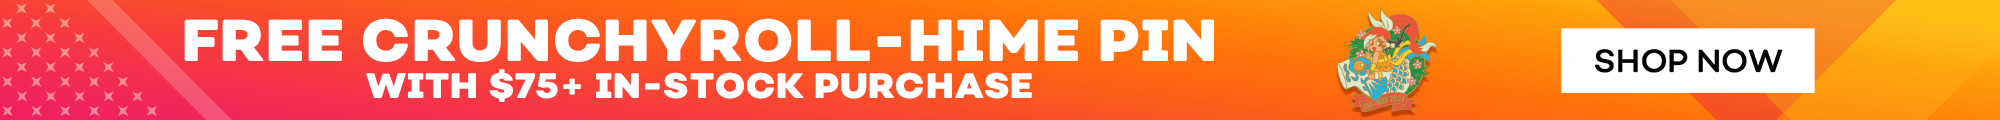  Crunchyroll-Hime Free Pin with $75+ In-Stock Purchase